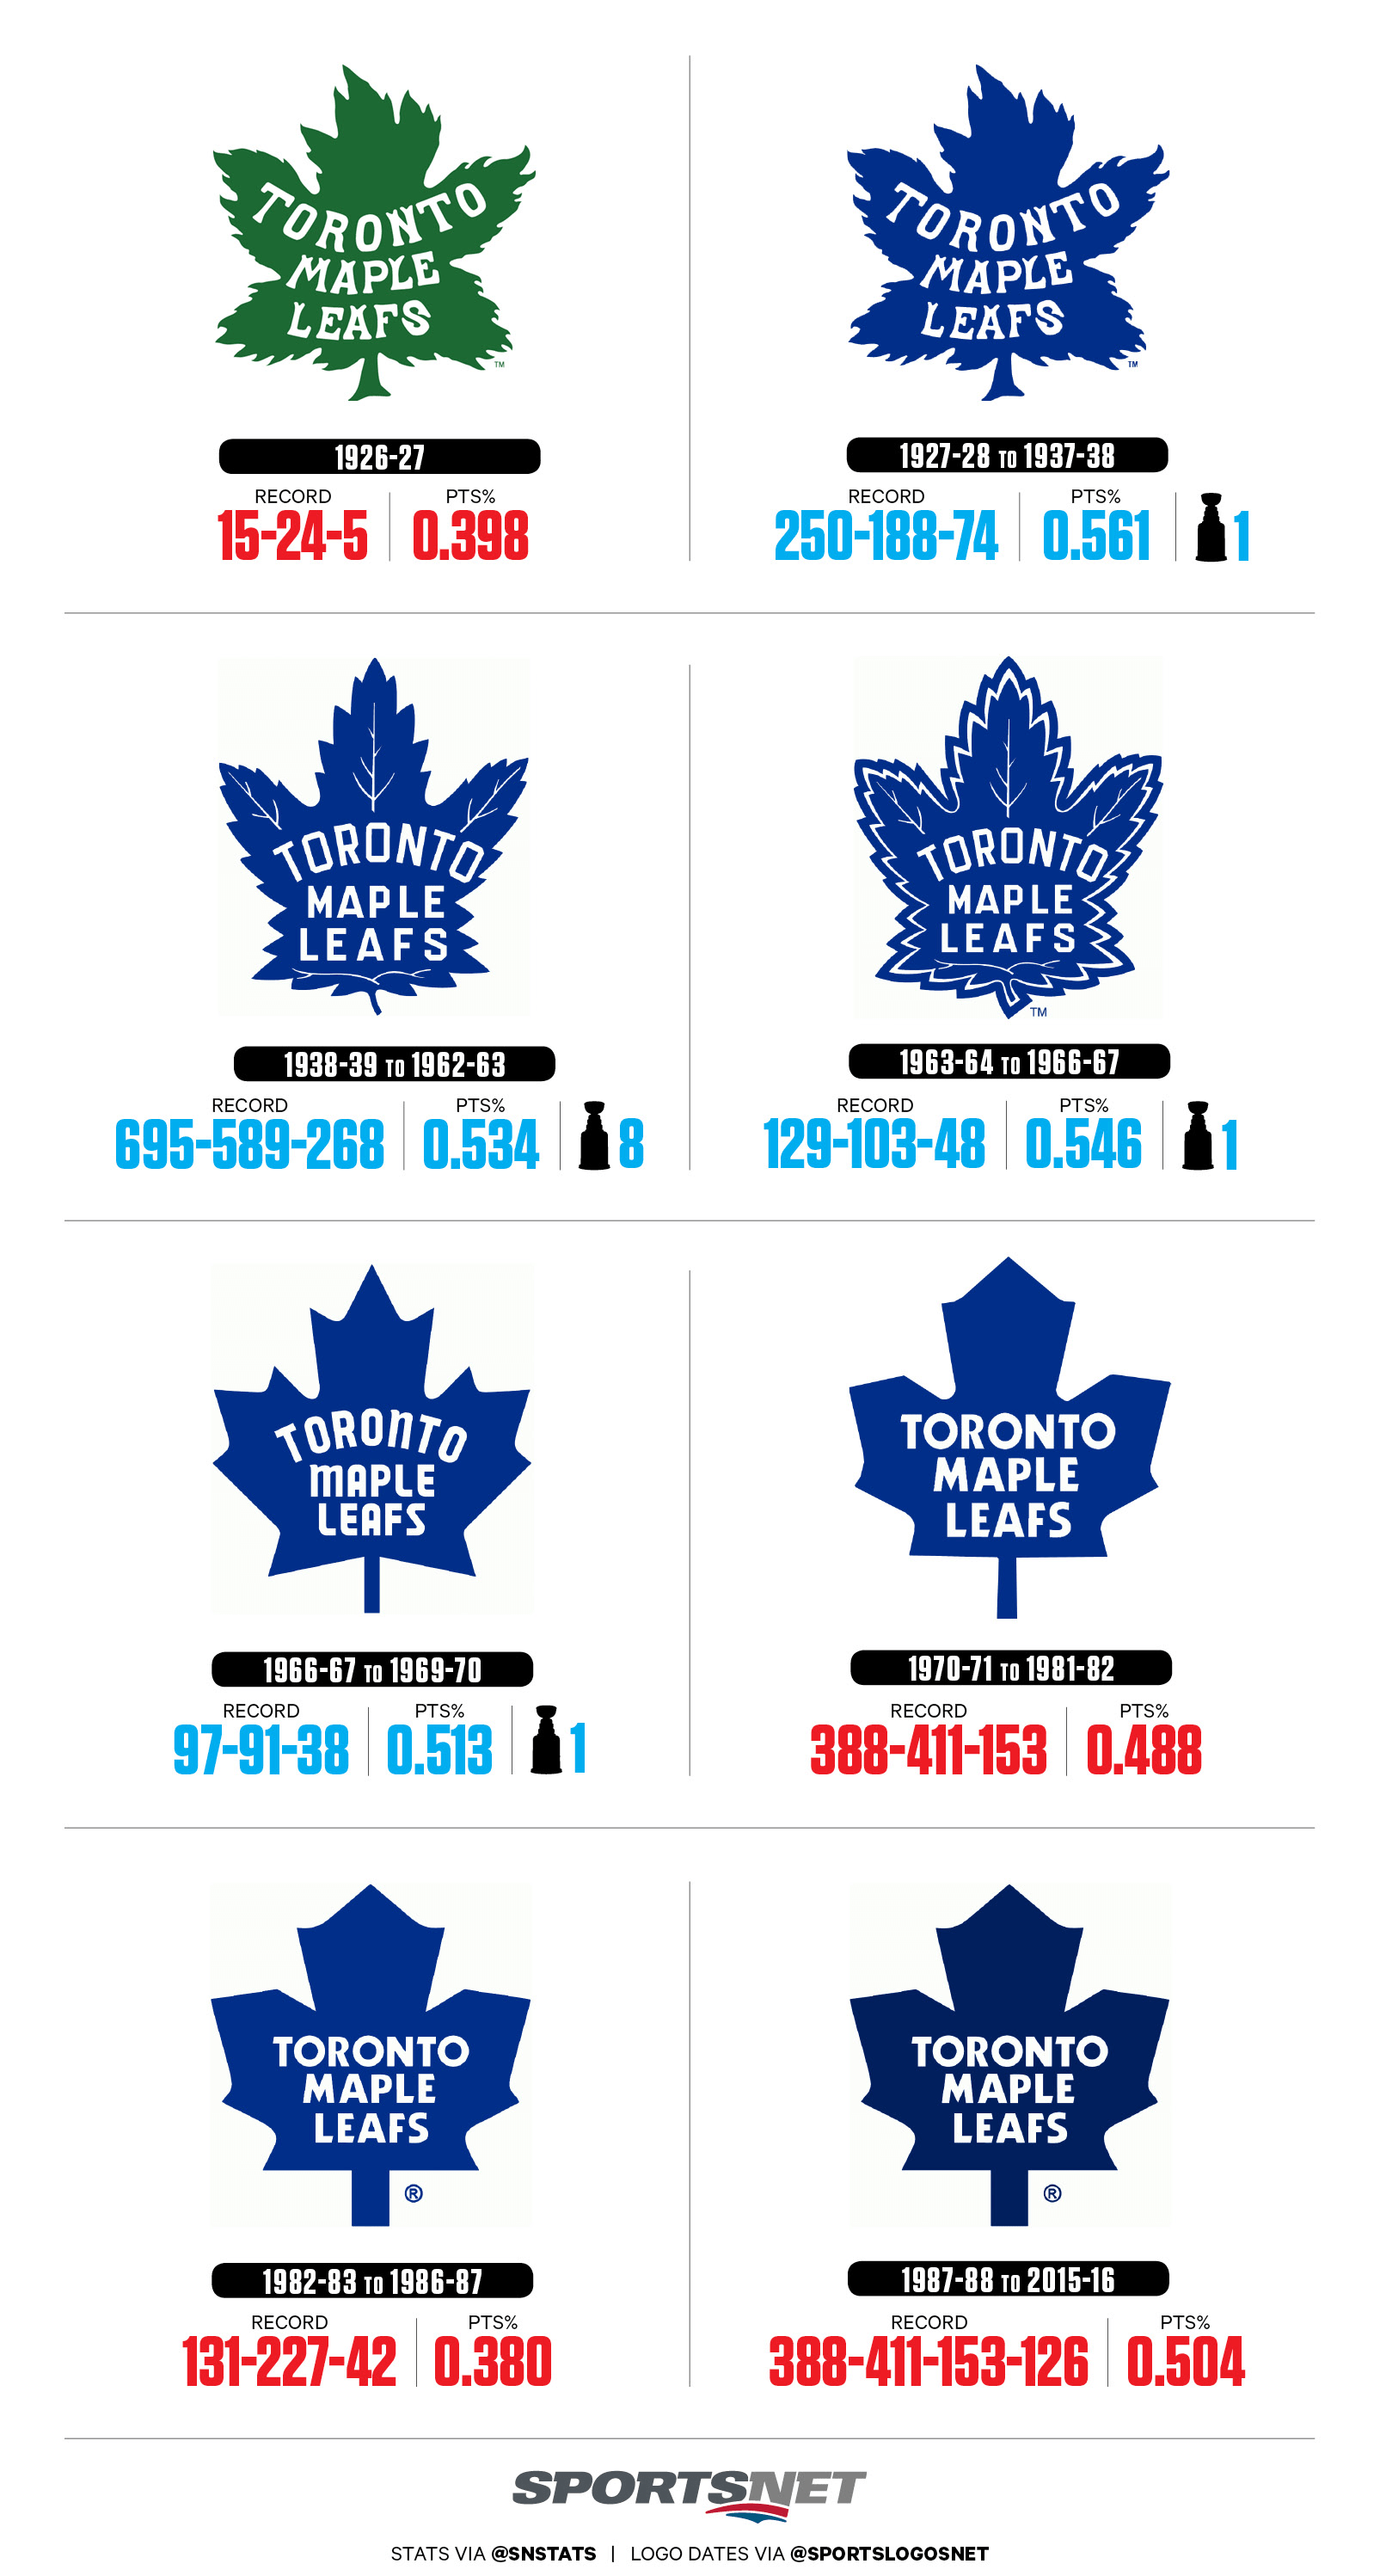 New Maple Leafs Logo - Twitter reaction to Maple Leafs unveiling new logo - Sportsnet.ca